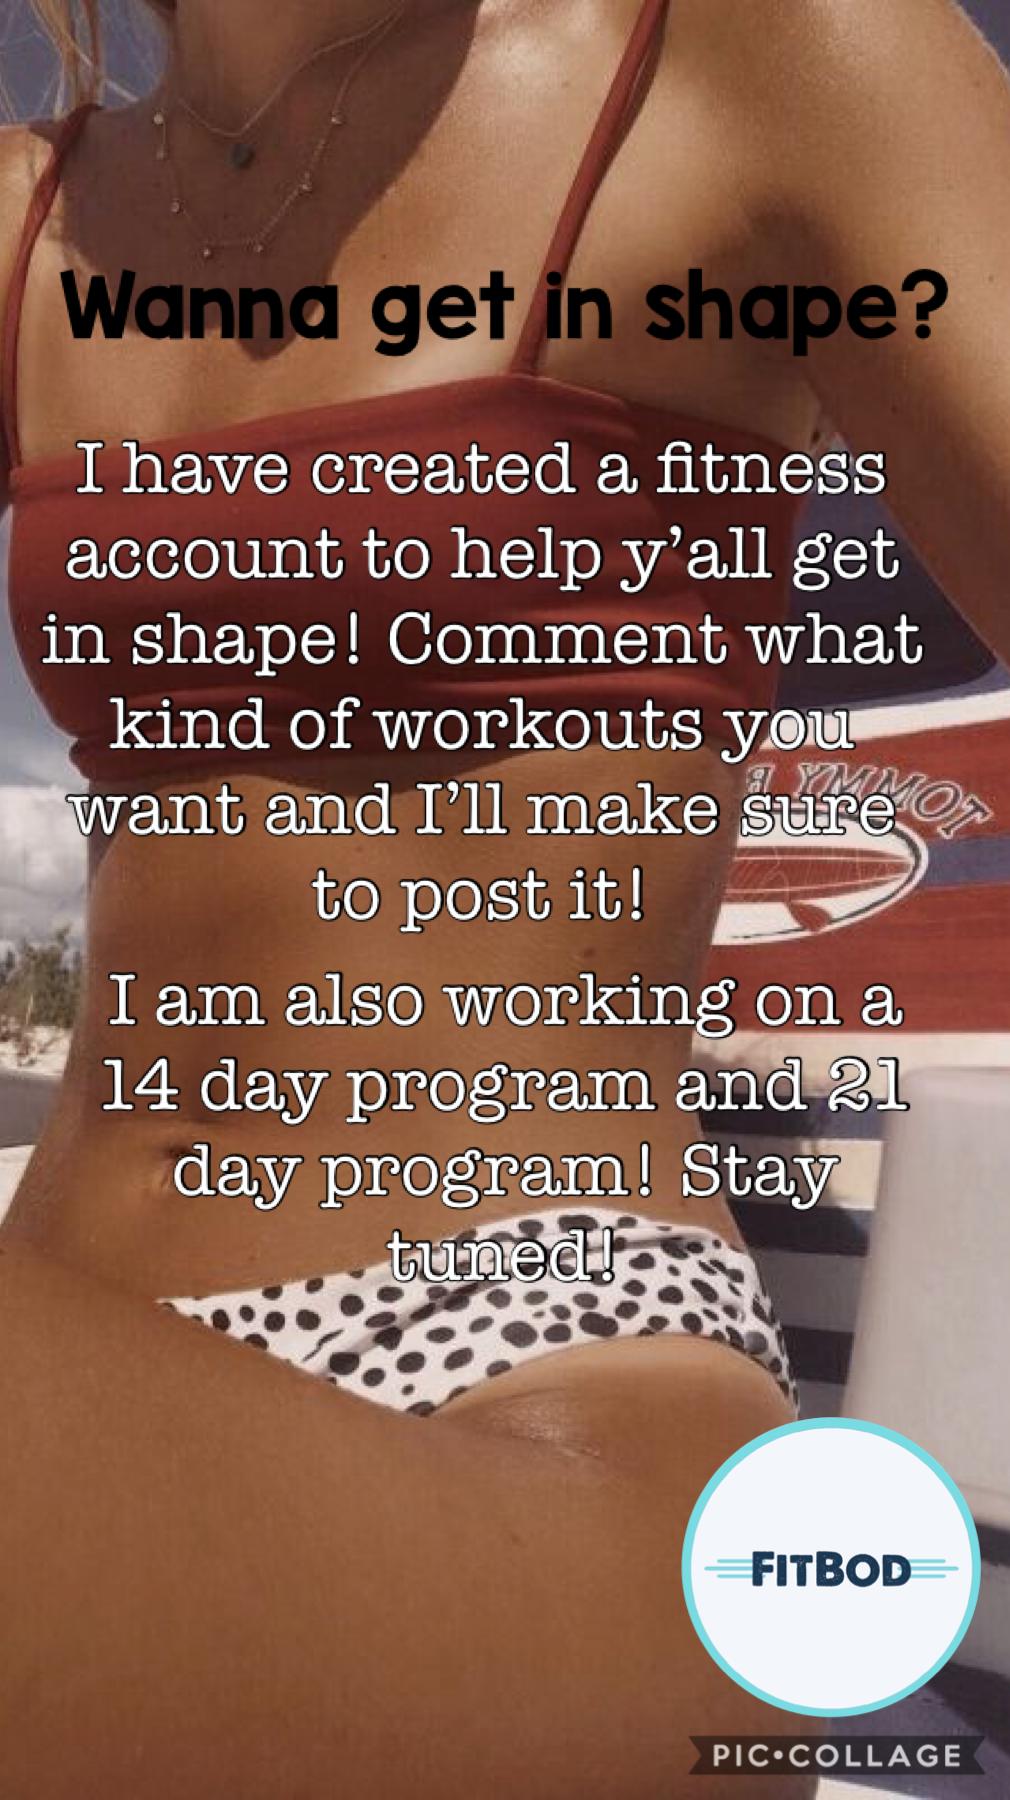 Please follow and stay tuned for more fitness!💞